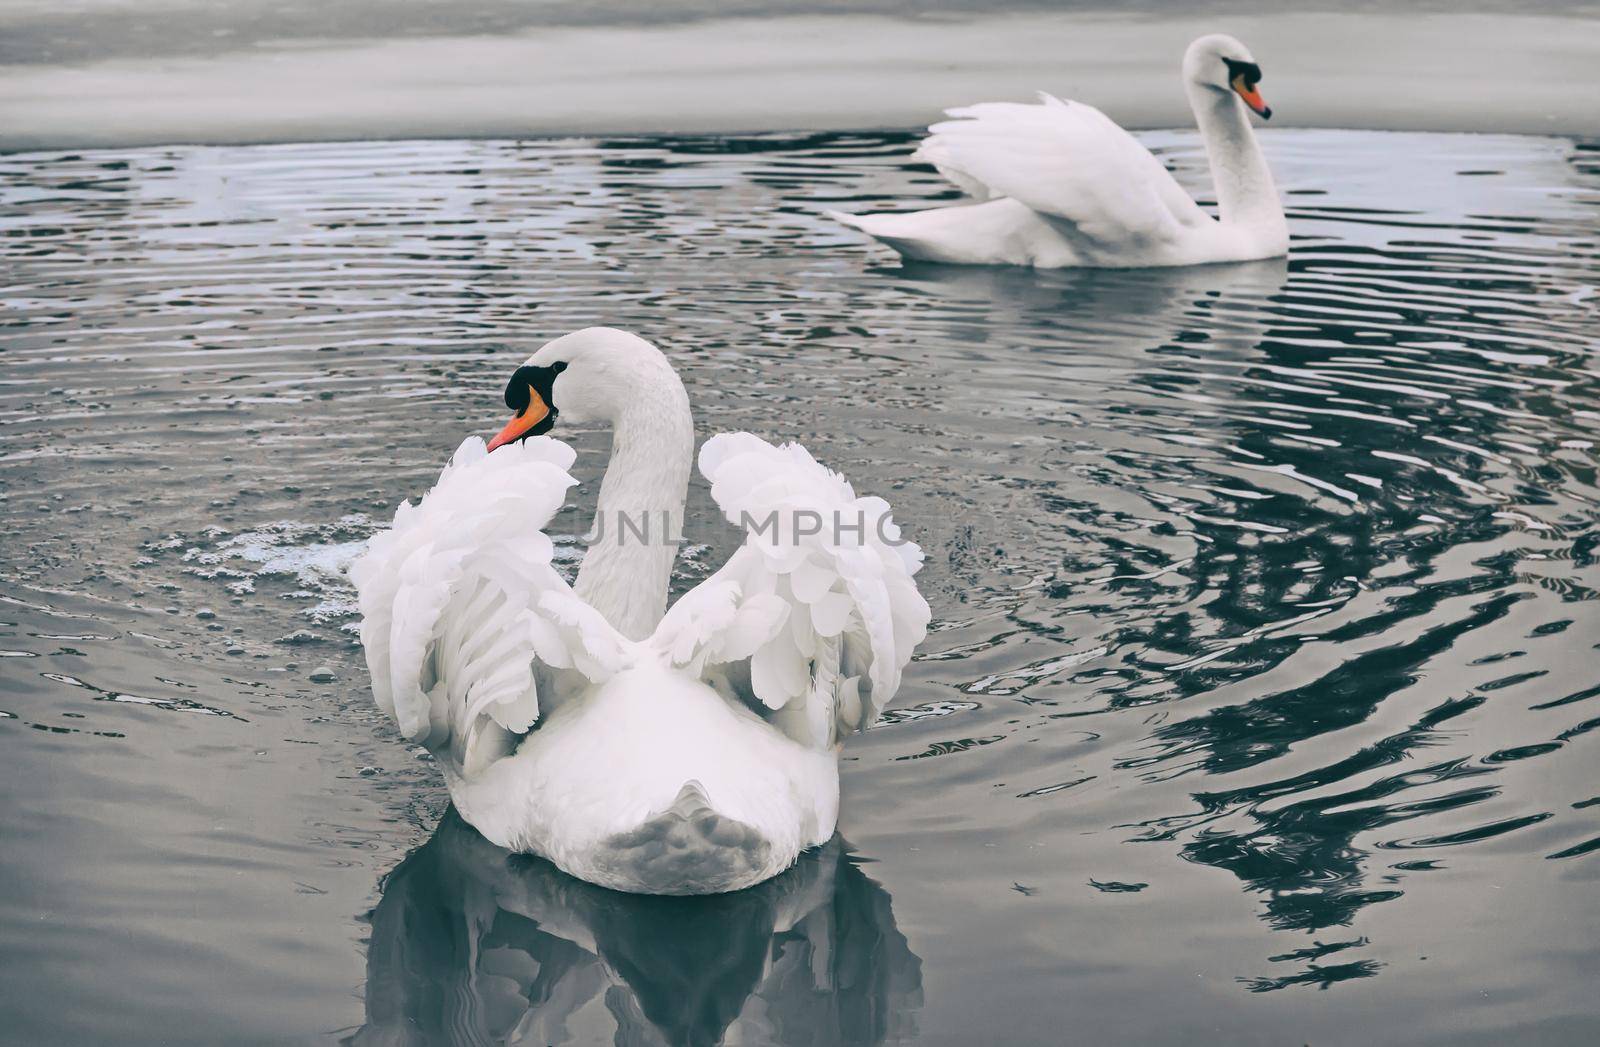 Two beautiful white swans float on the surface of the lake, the shores of which are covered with snow.